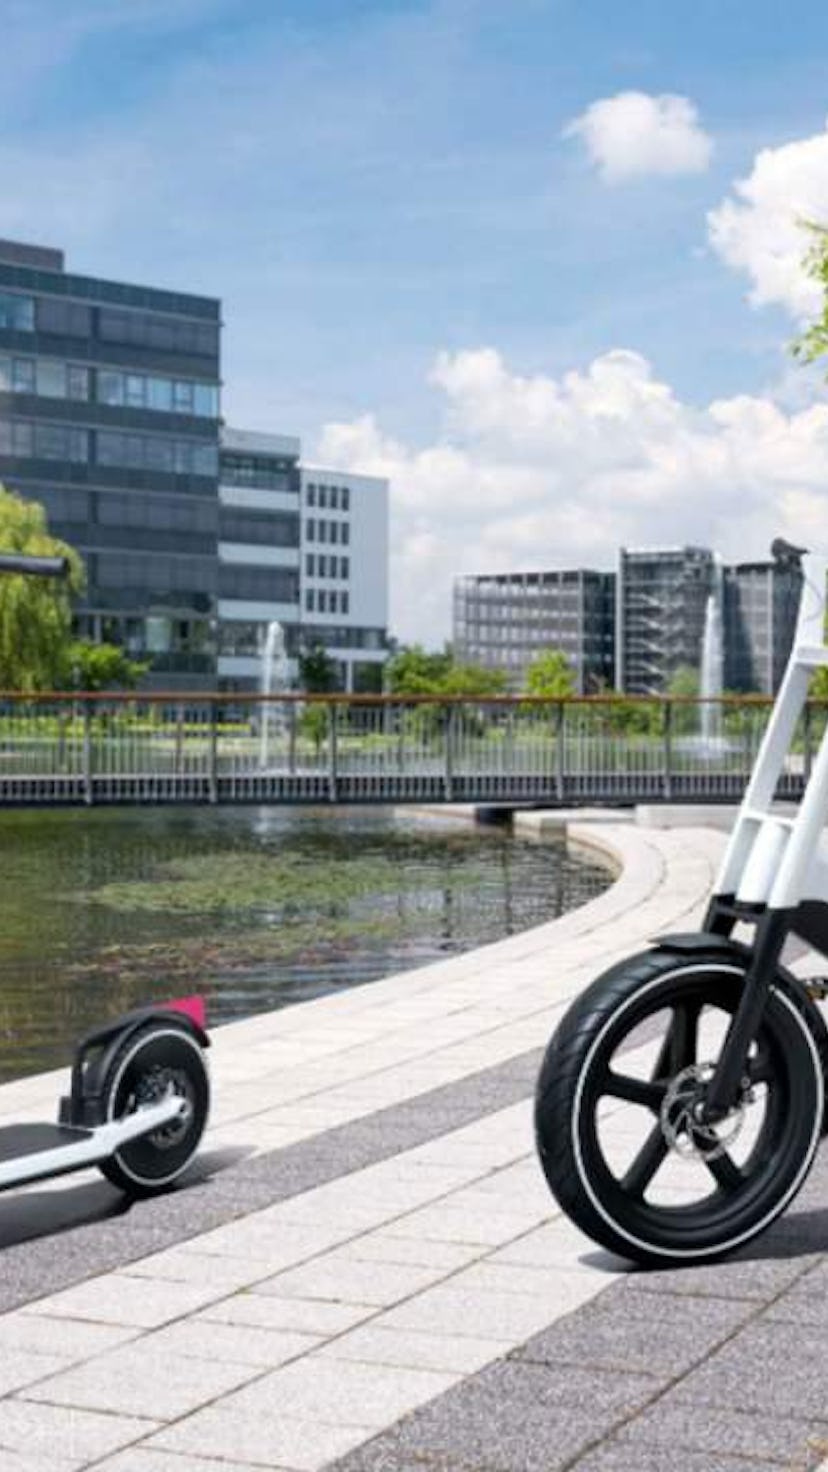 Rendered images of BMW's new e-bike and e-scooter